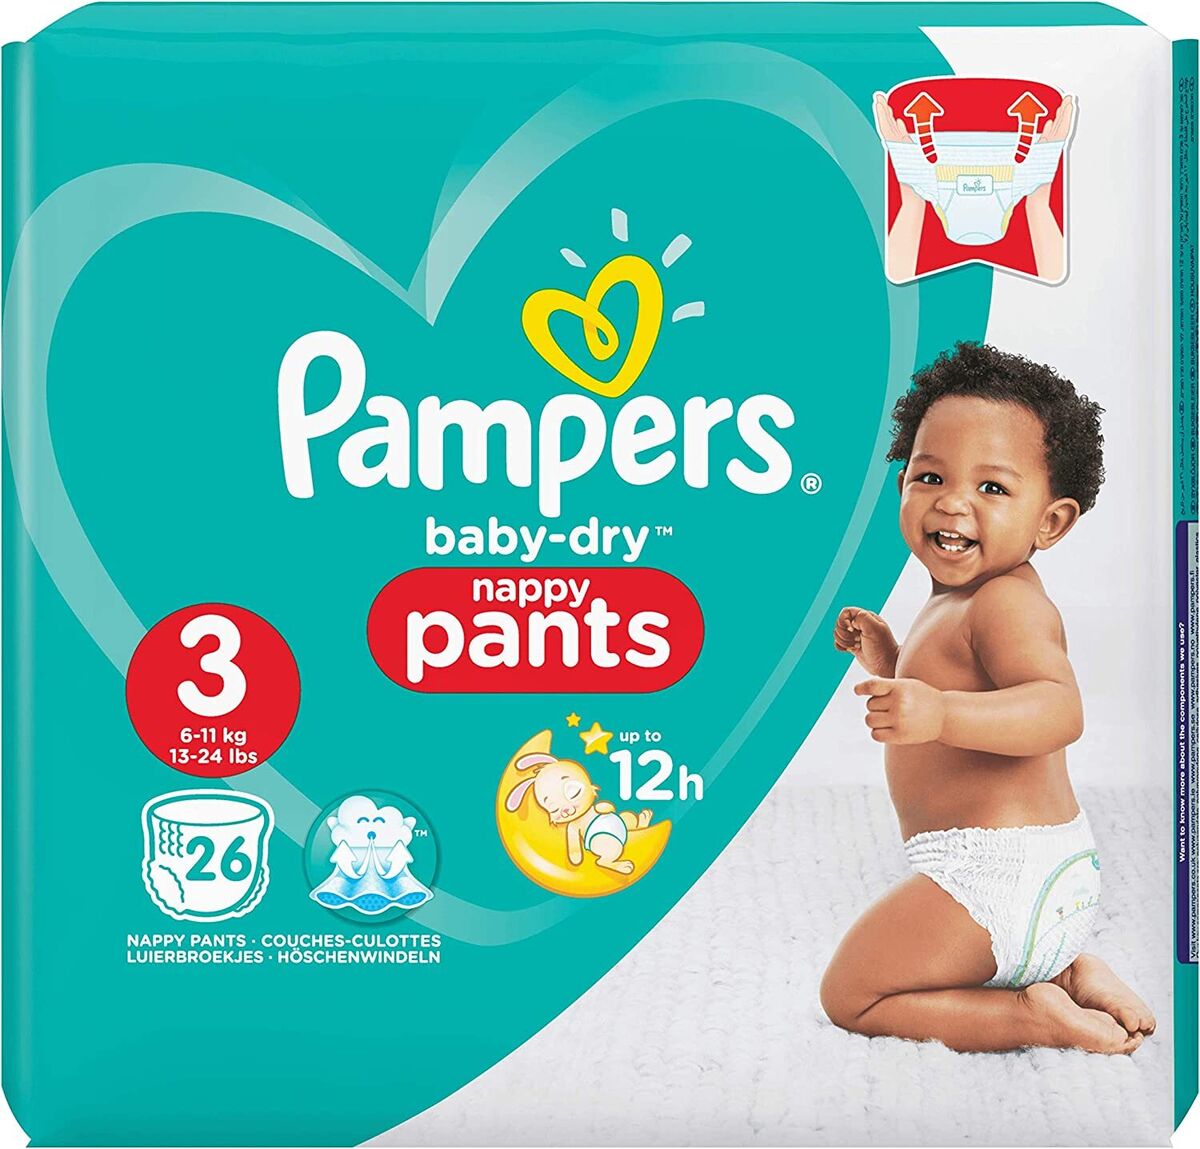 pampers pants 4 208